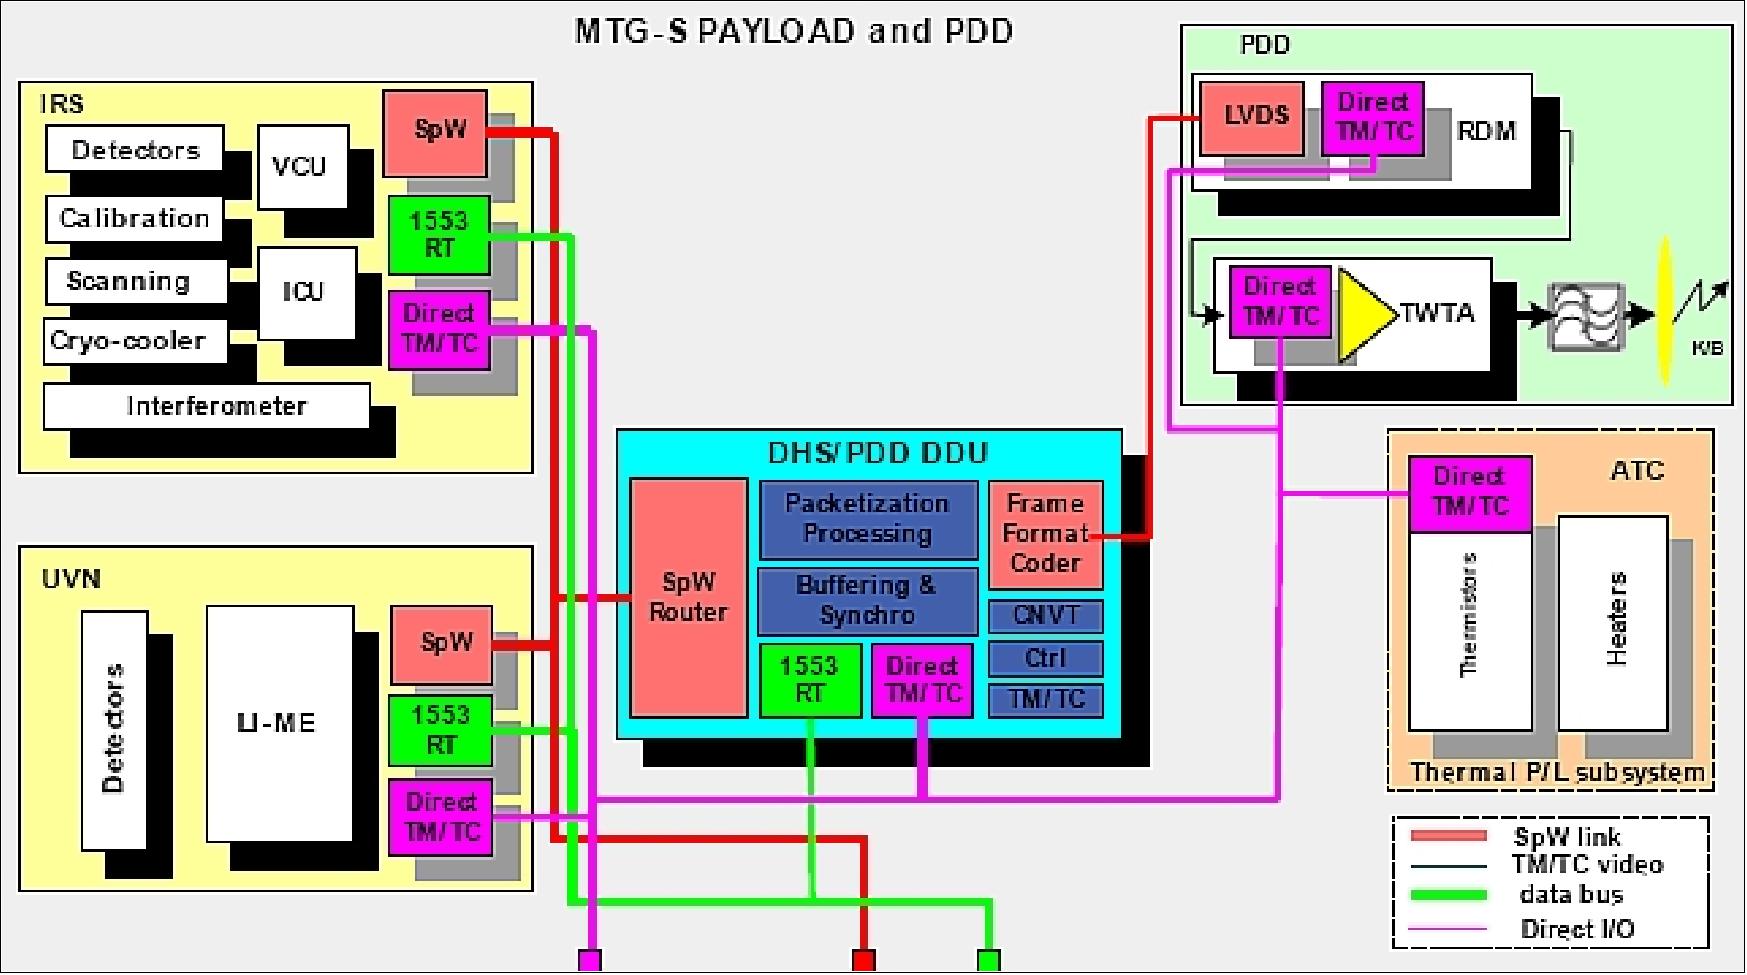 Figure 8: On-board data handling architecture of the MTG-S spacecraft (image credit: TAS)